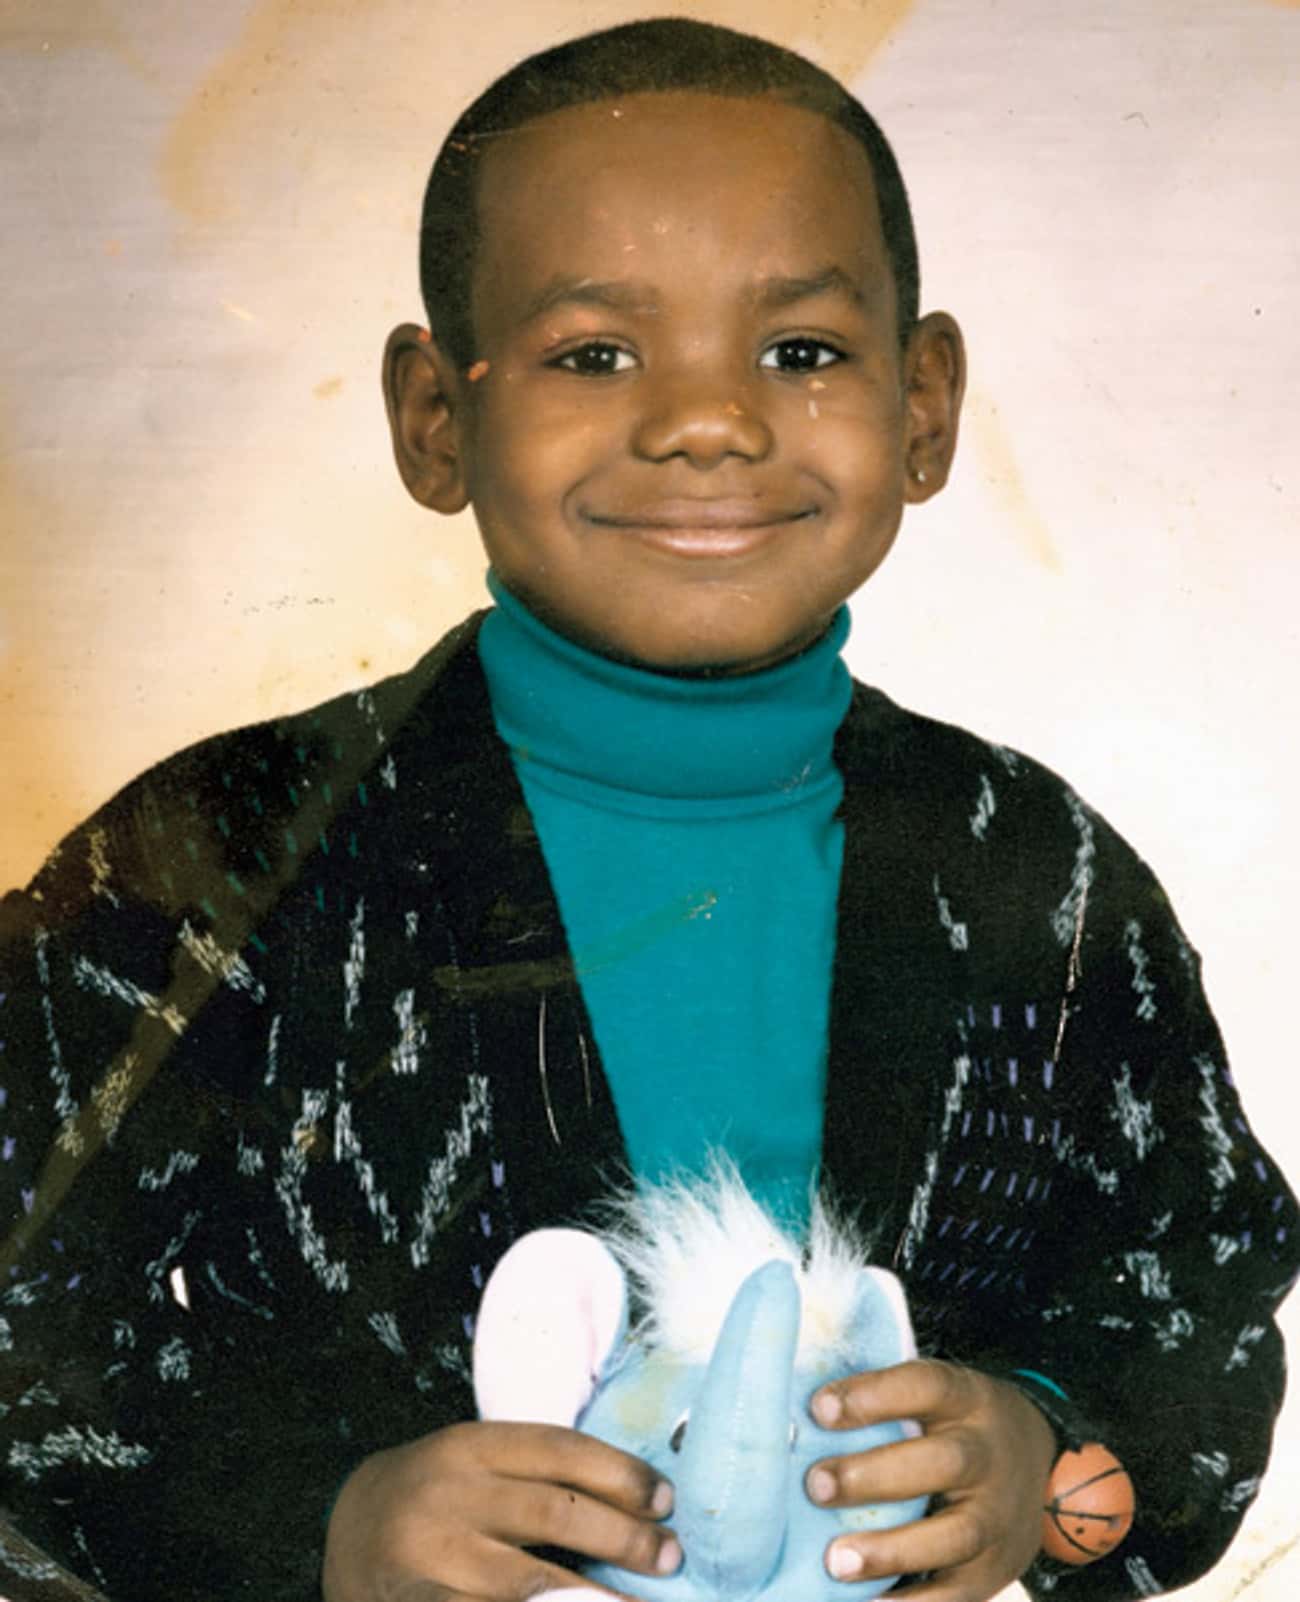 Young LeBron James in Turquoise Turtleneck as a Kid